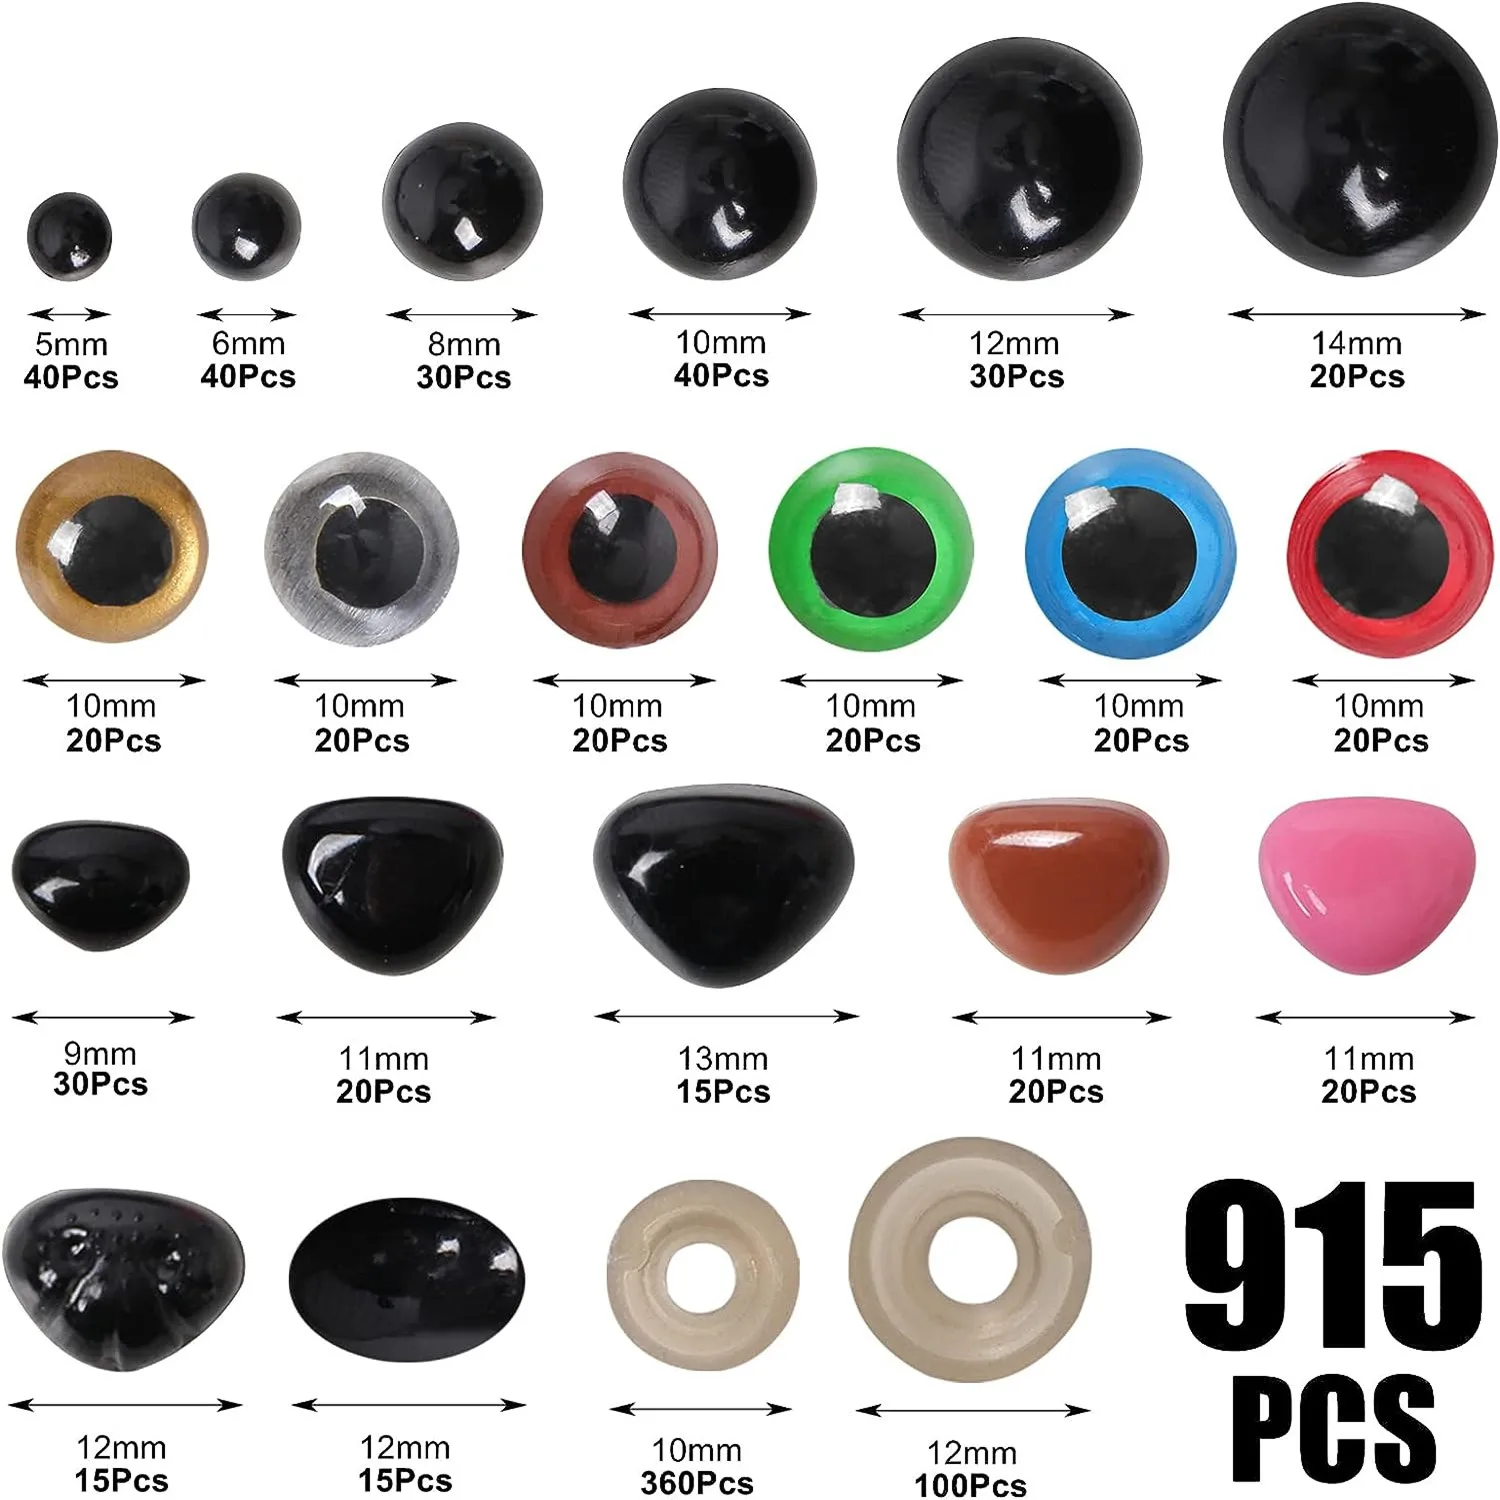 100pcs 4in1 Plastic Doll Eyes Nose DIY Safety Black Colorful Craft